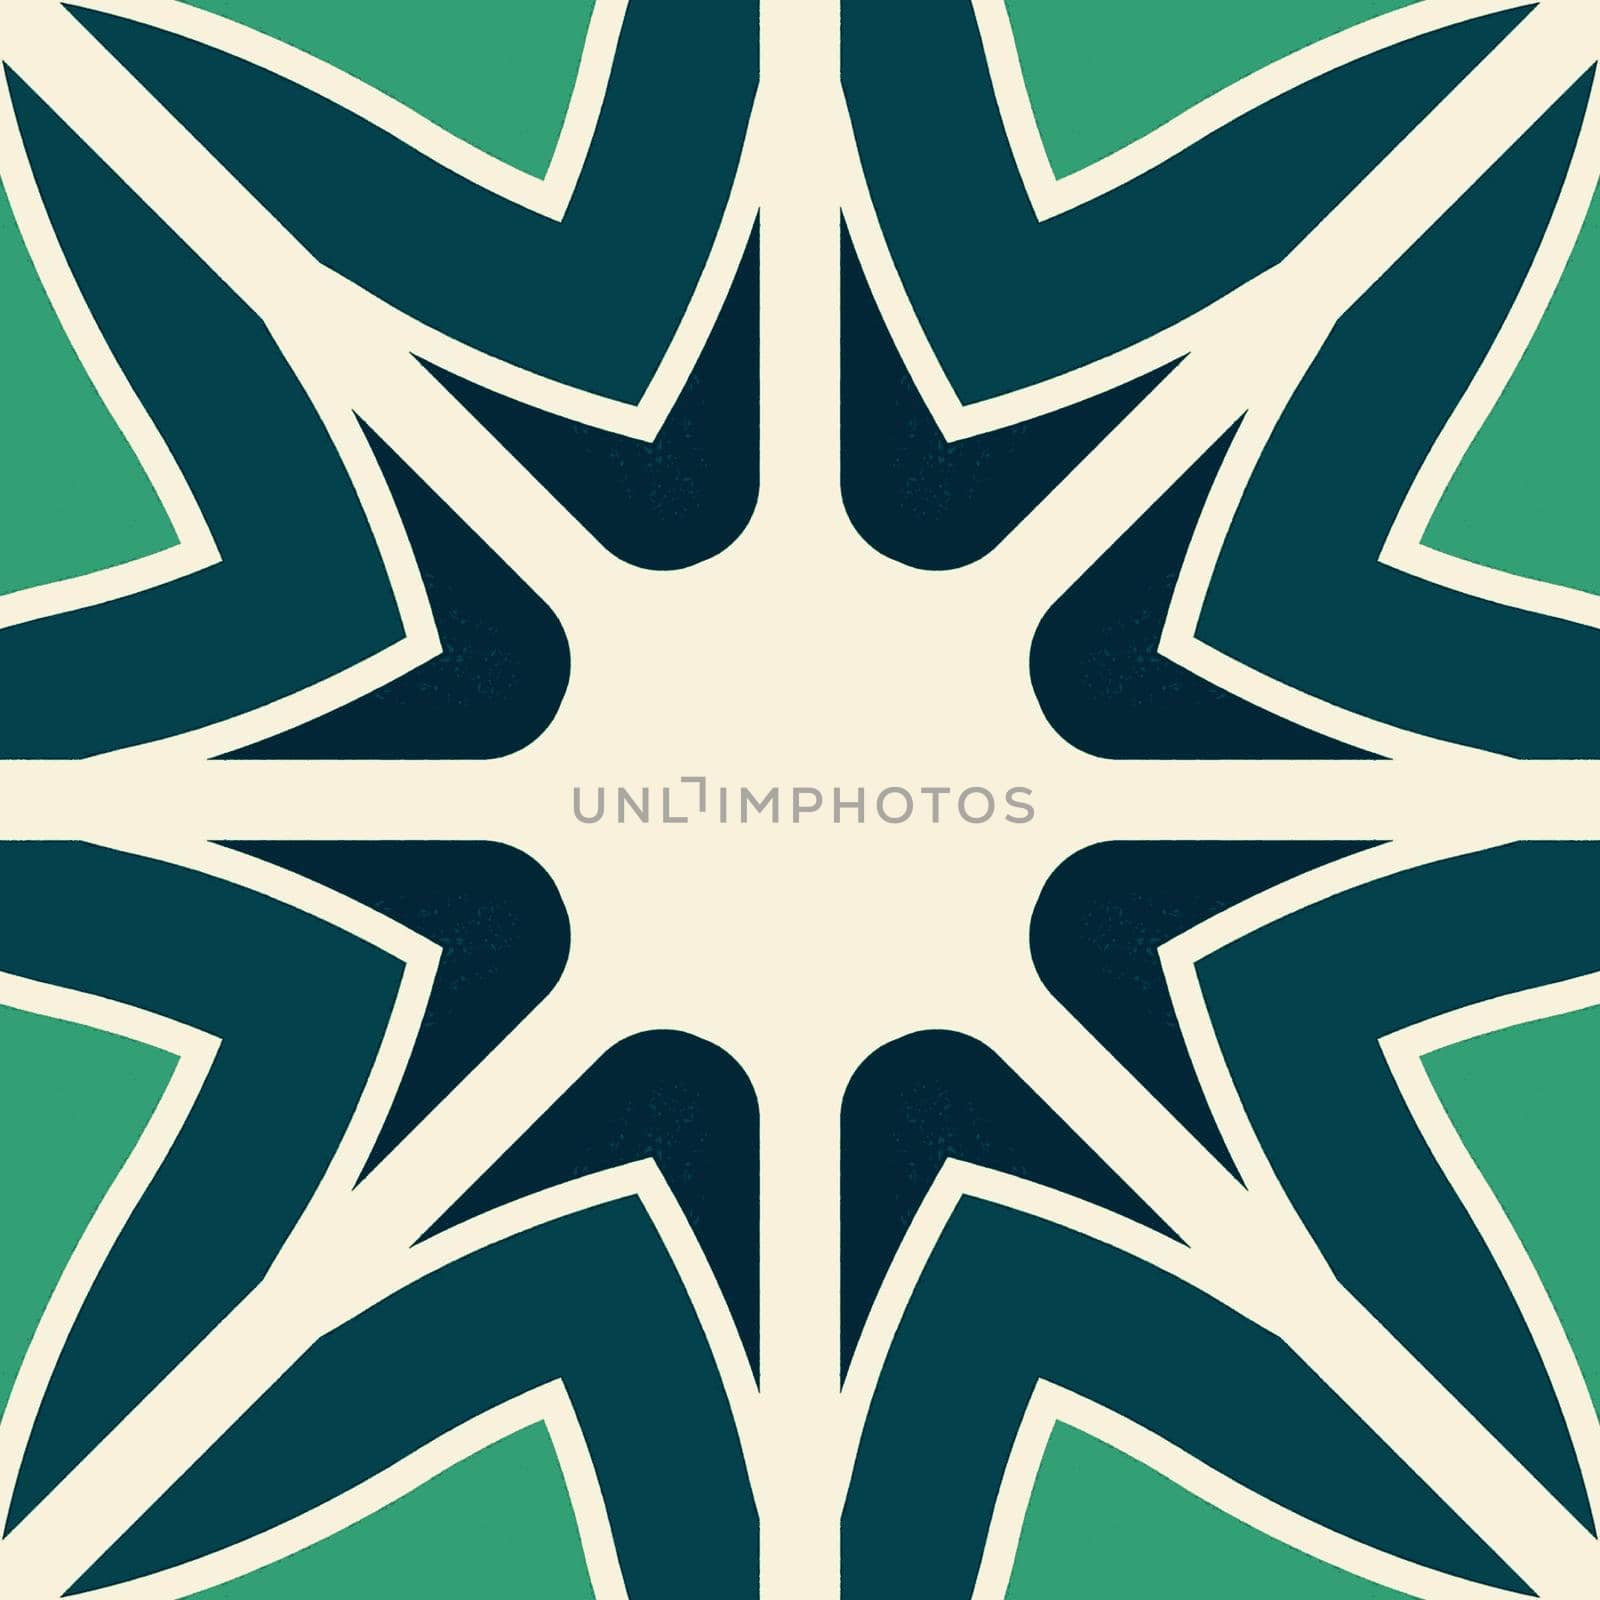 Beautiful shades of green color symmetrical patterns designs by tabishere